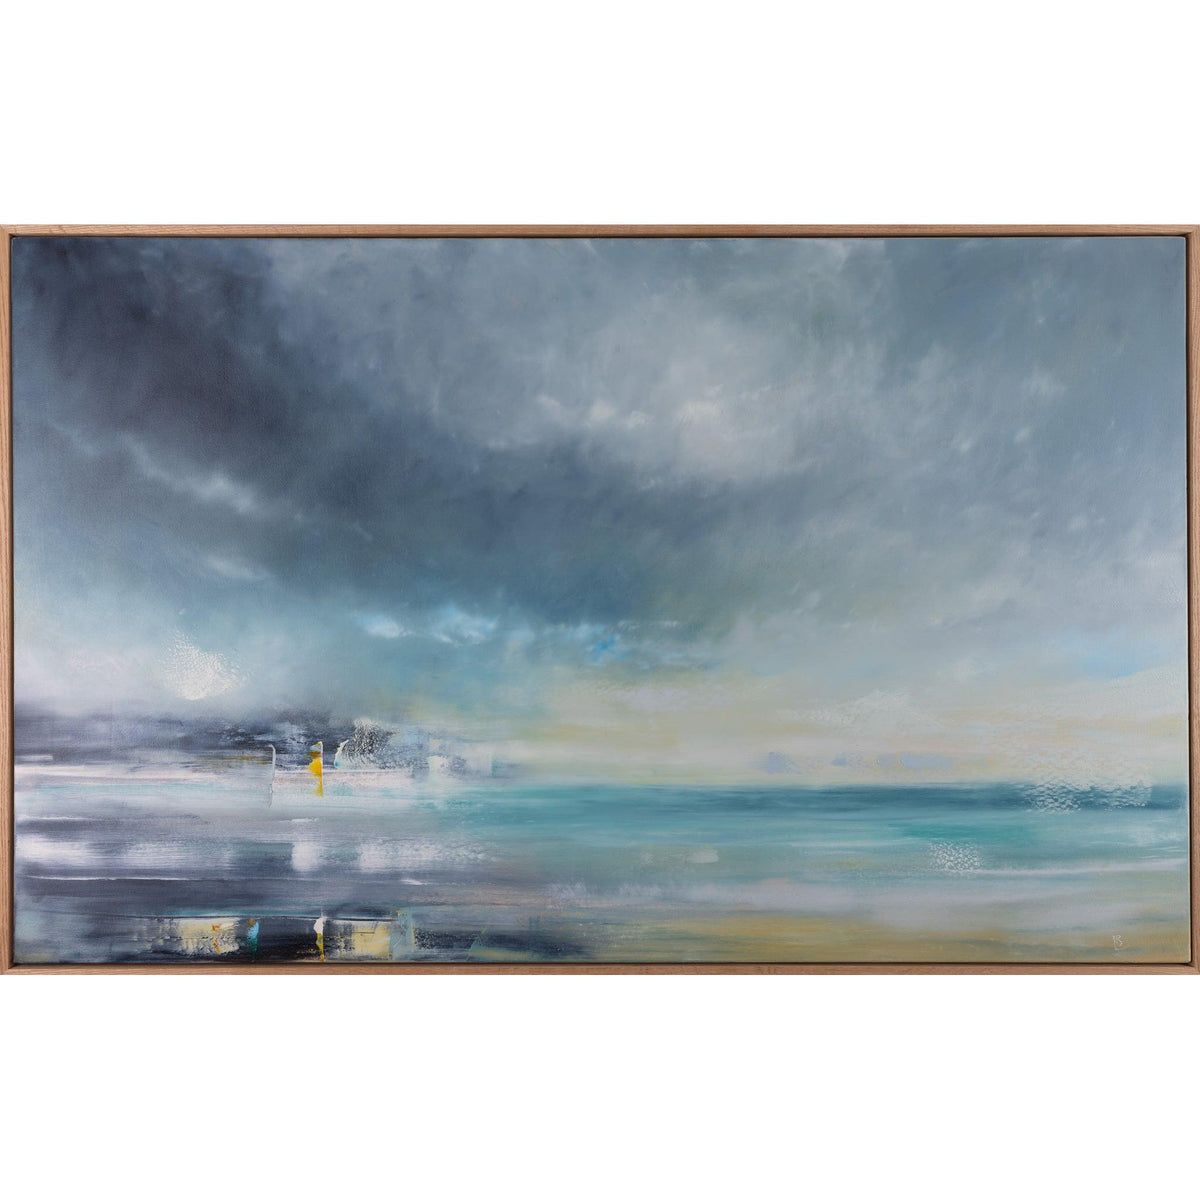 &#39;Echoes of Light&#39; oil on canvas by Ben Lucas, available at Padstow Gallery, Cornwall